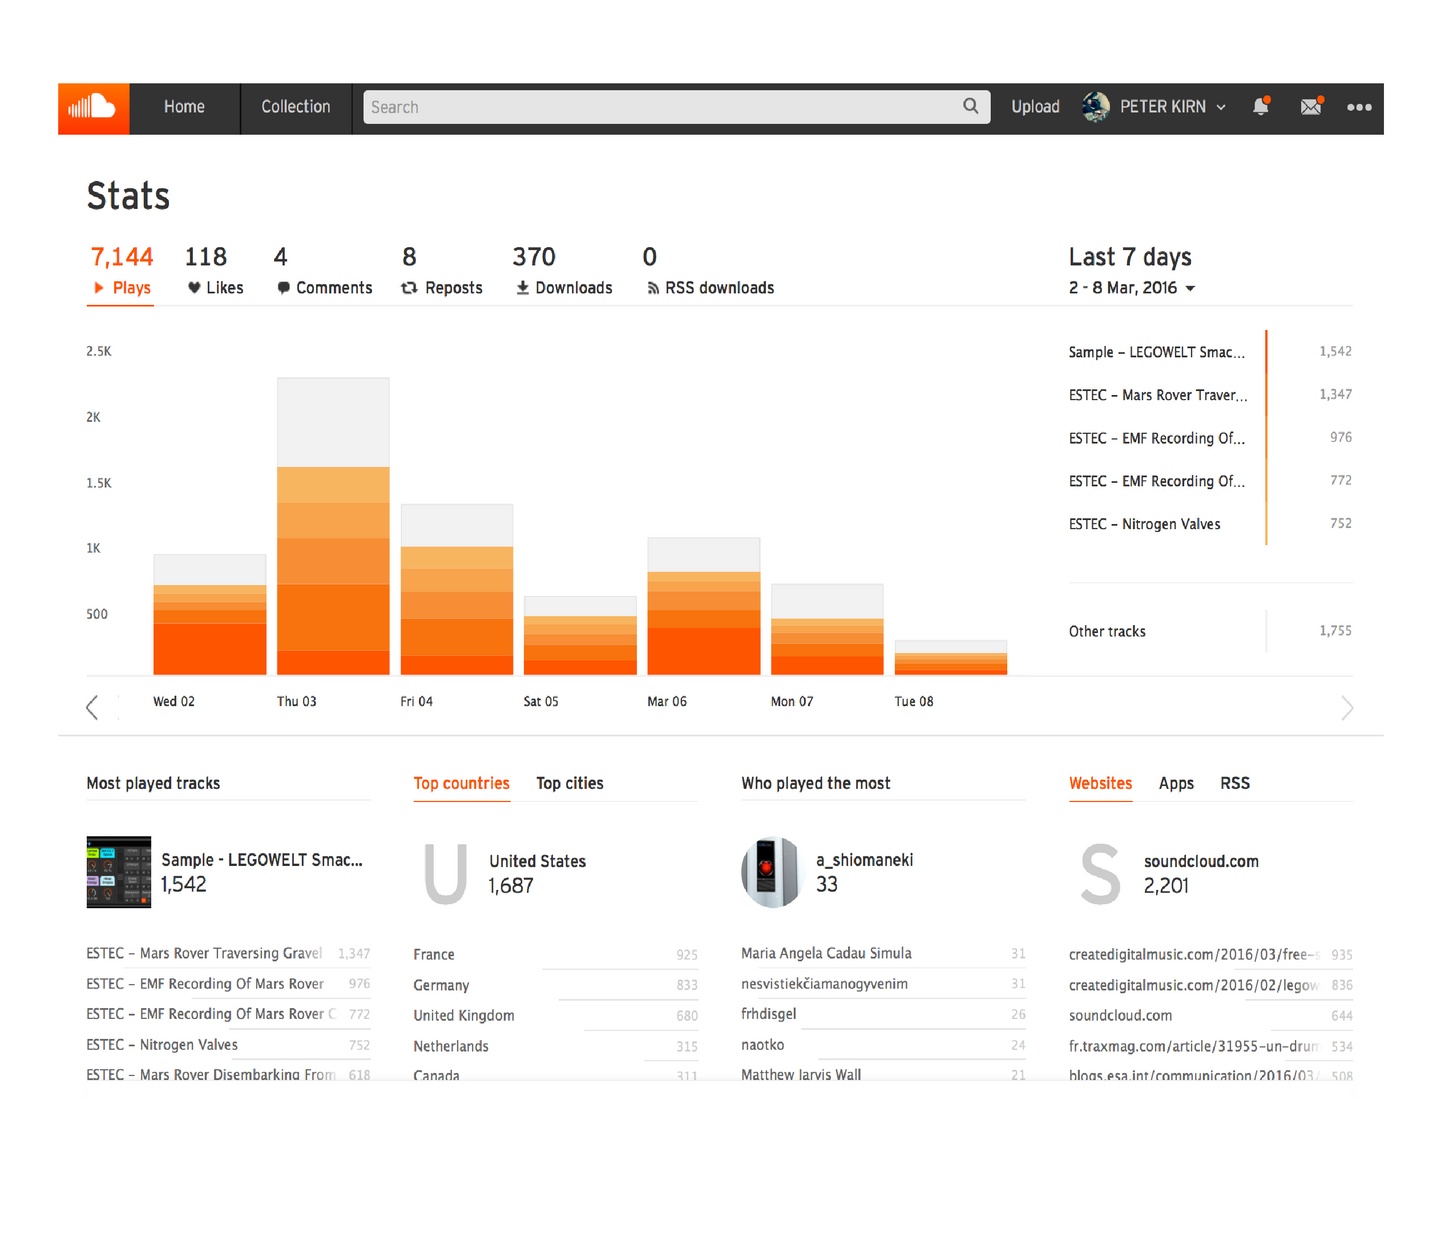 Buy 1000 Soundcloud Plays - The new way to get more Soundcloud plays!